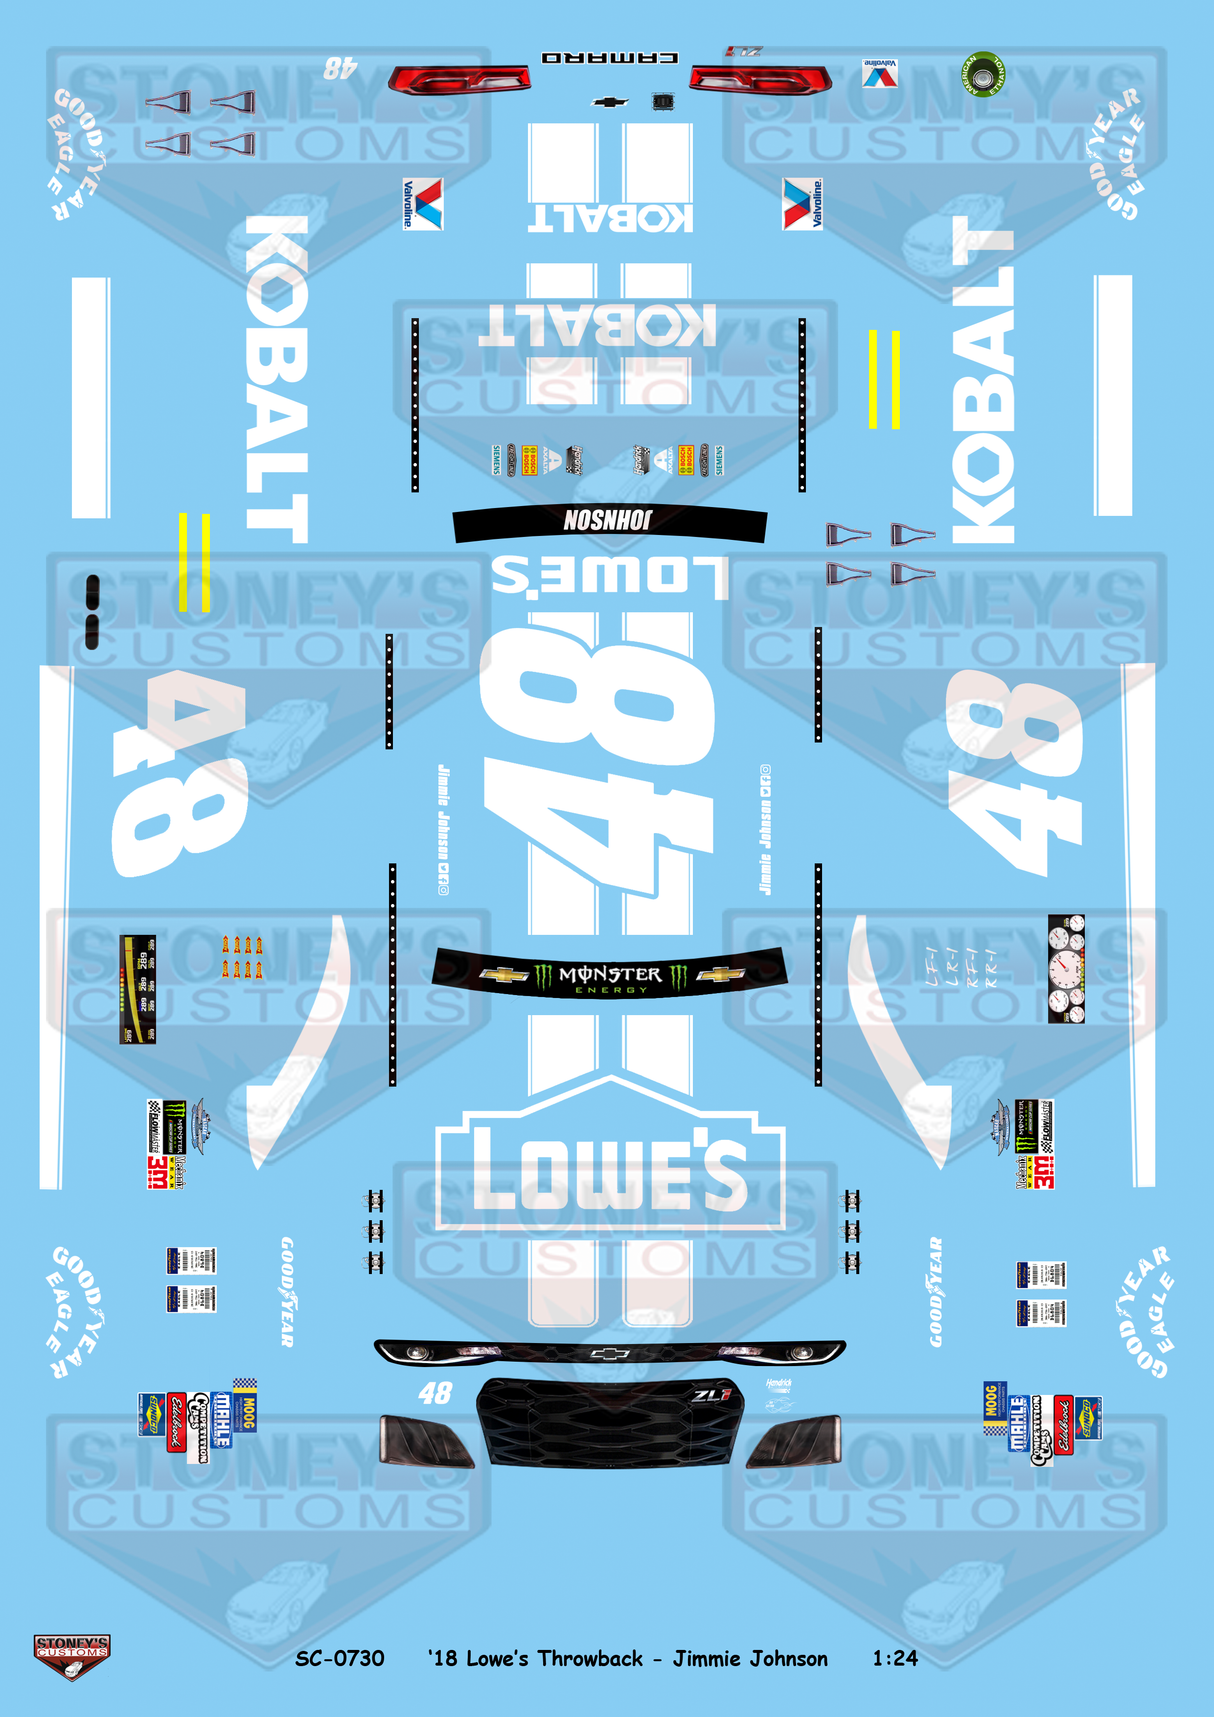 Stoney's Customs 2018 #48 Lowe’s Throwback - Jimmie Johnson 1:24 Decal Set